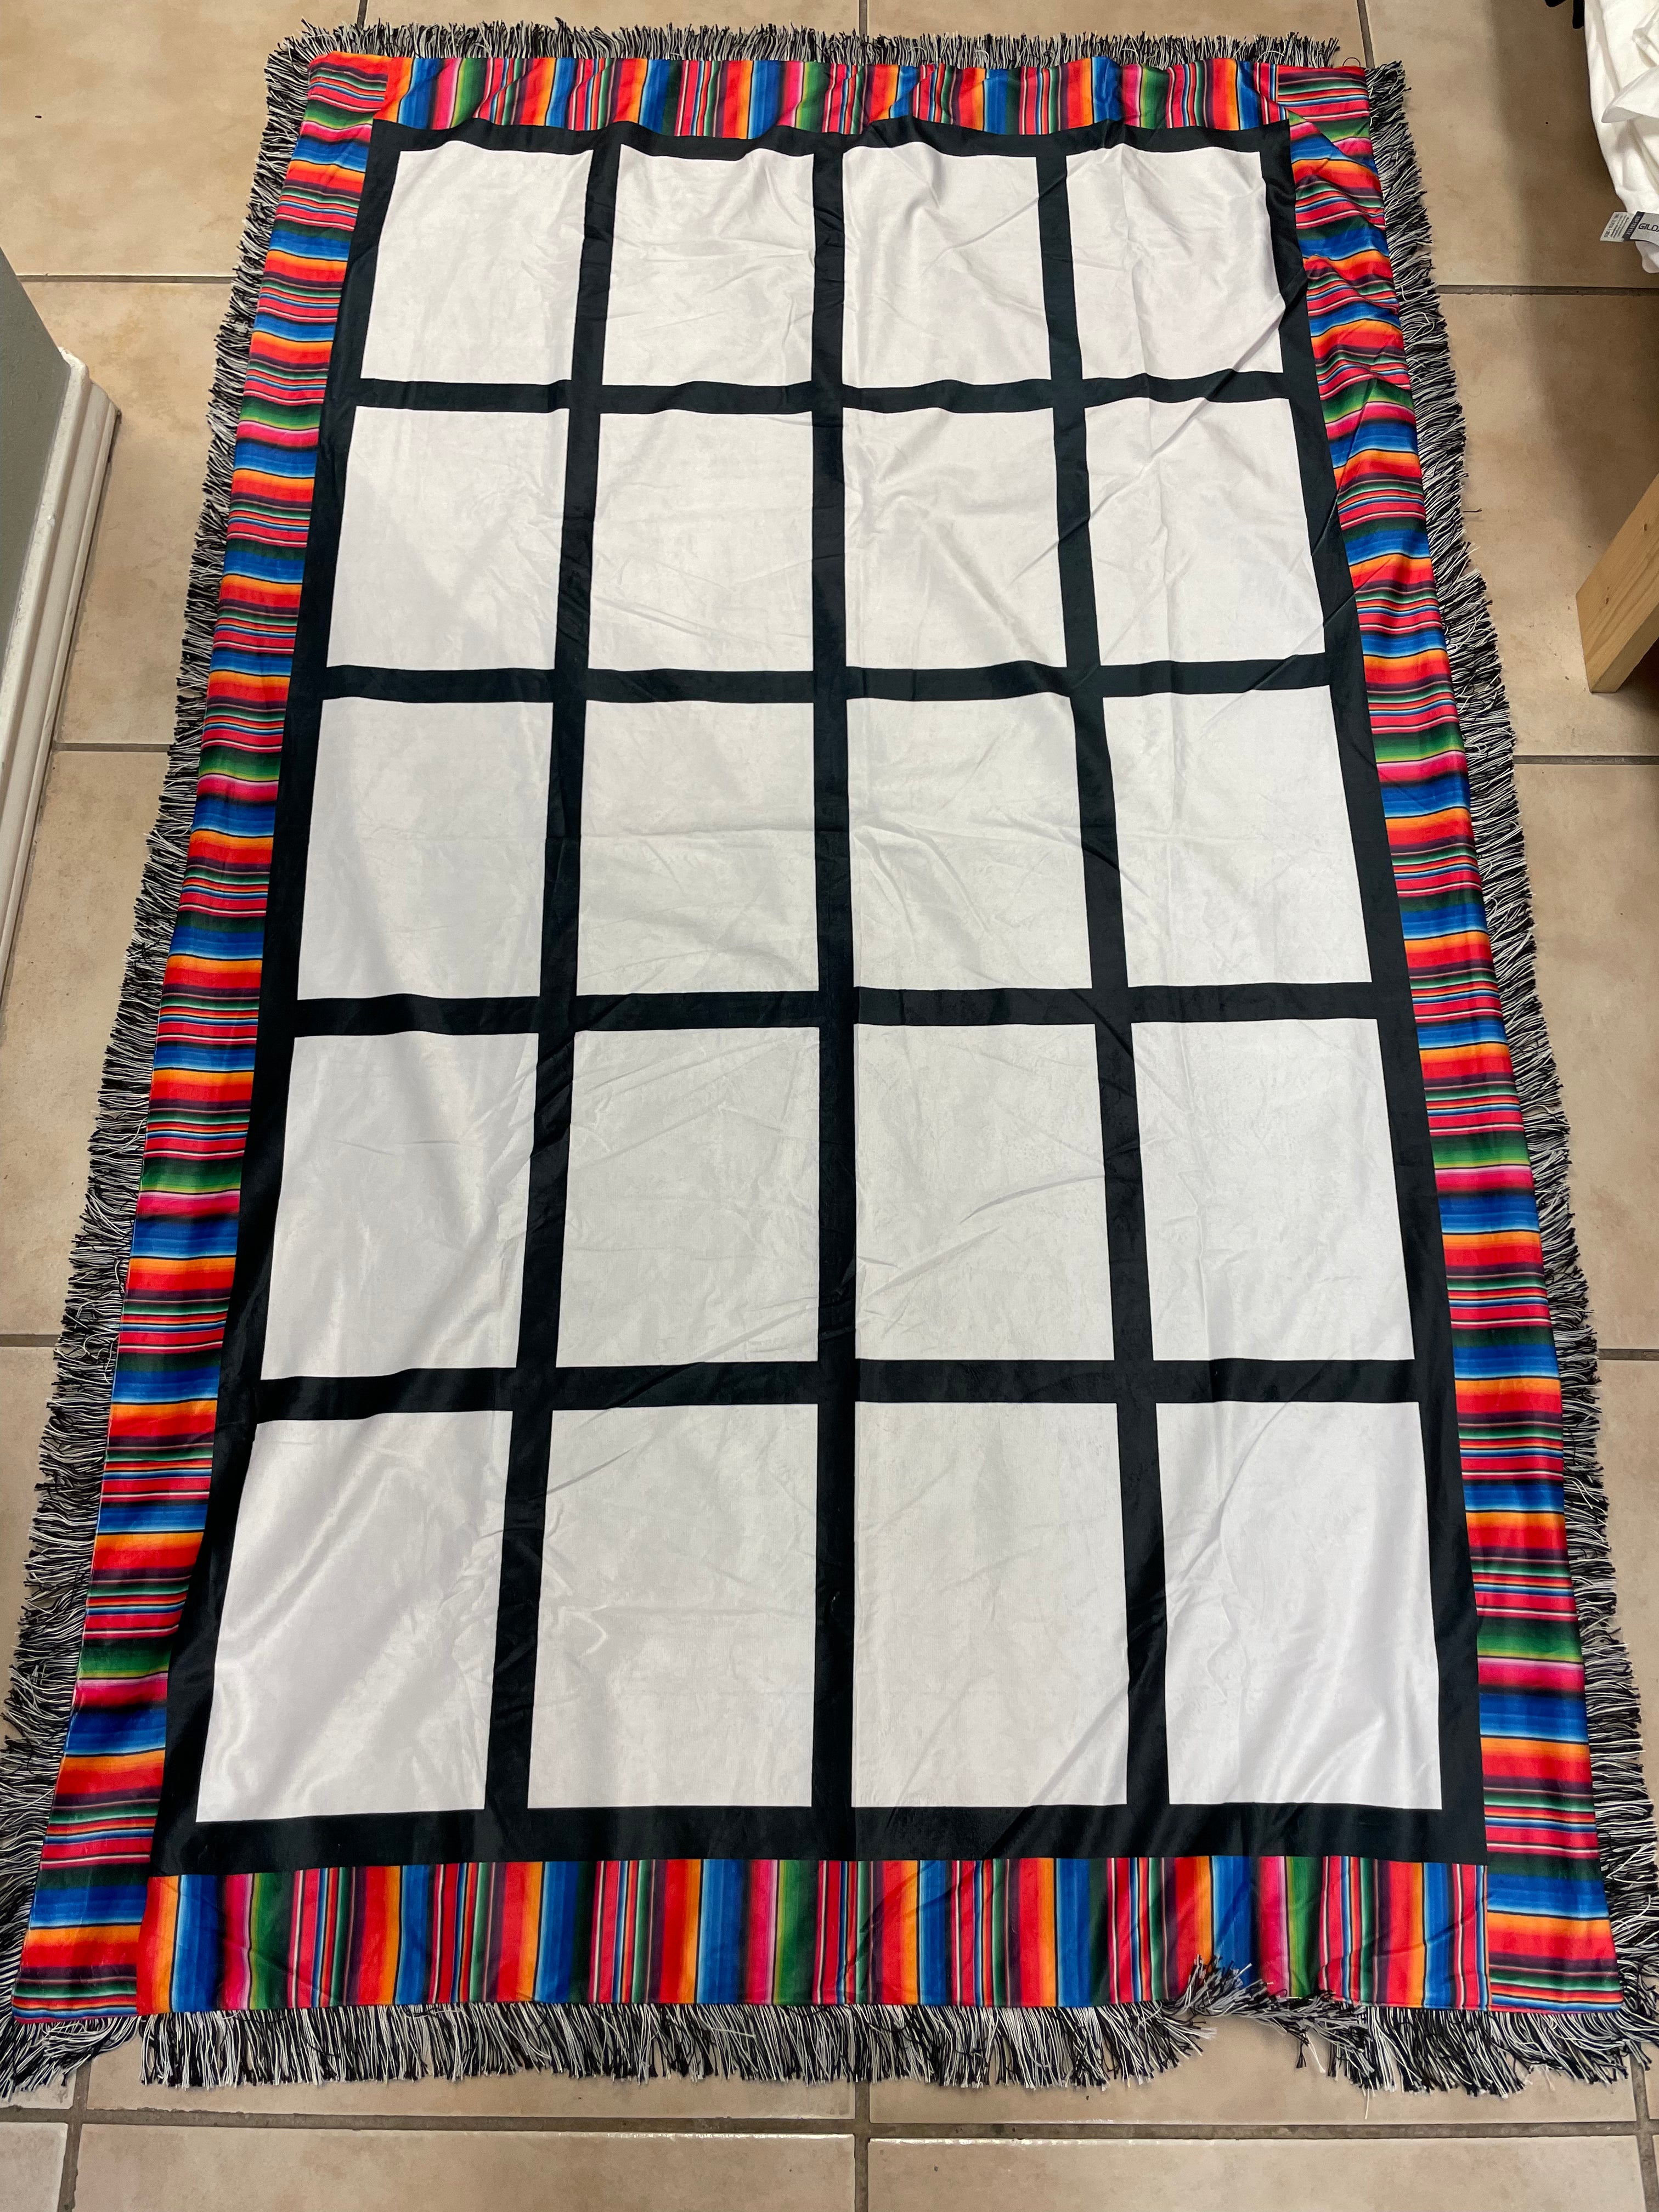 We sourced panel blankets to add - SA Sublimation Blanks